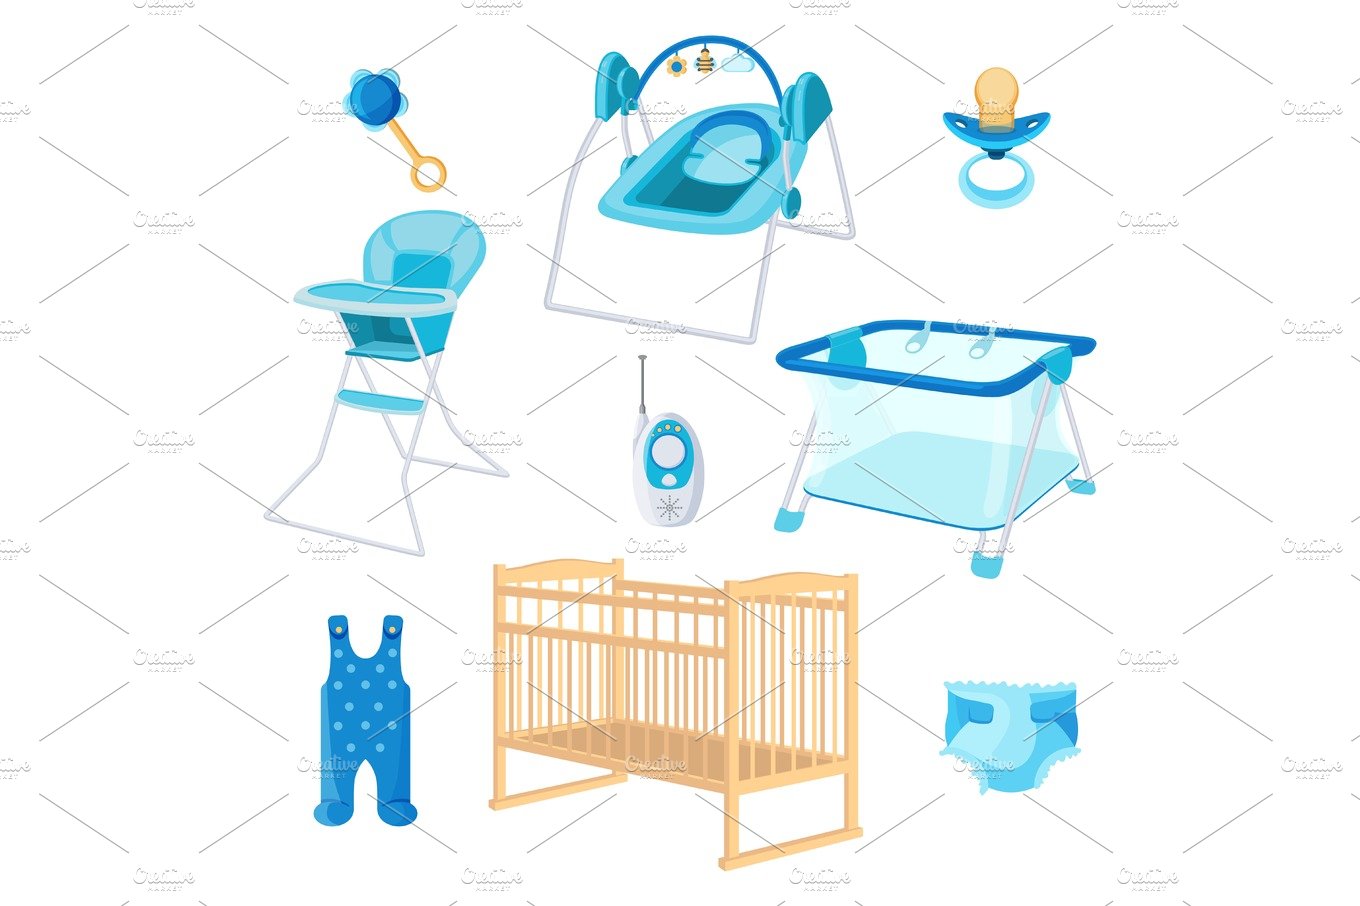 Bedroom furniture for newborn boy on white background cover image.